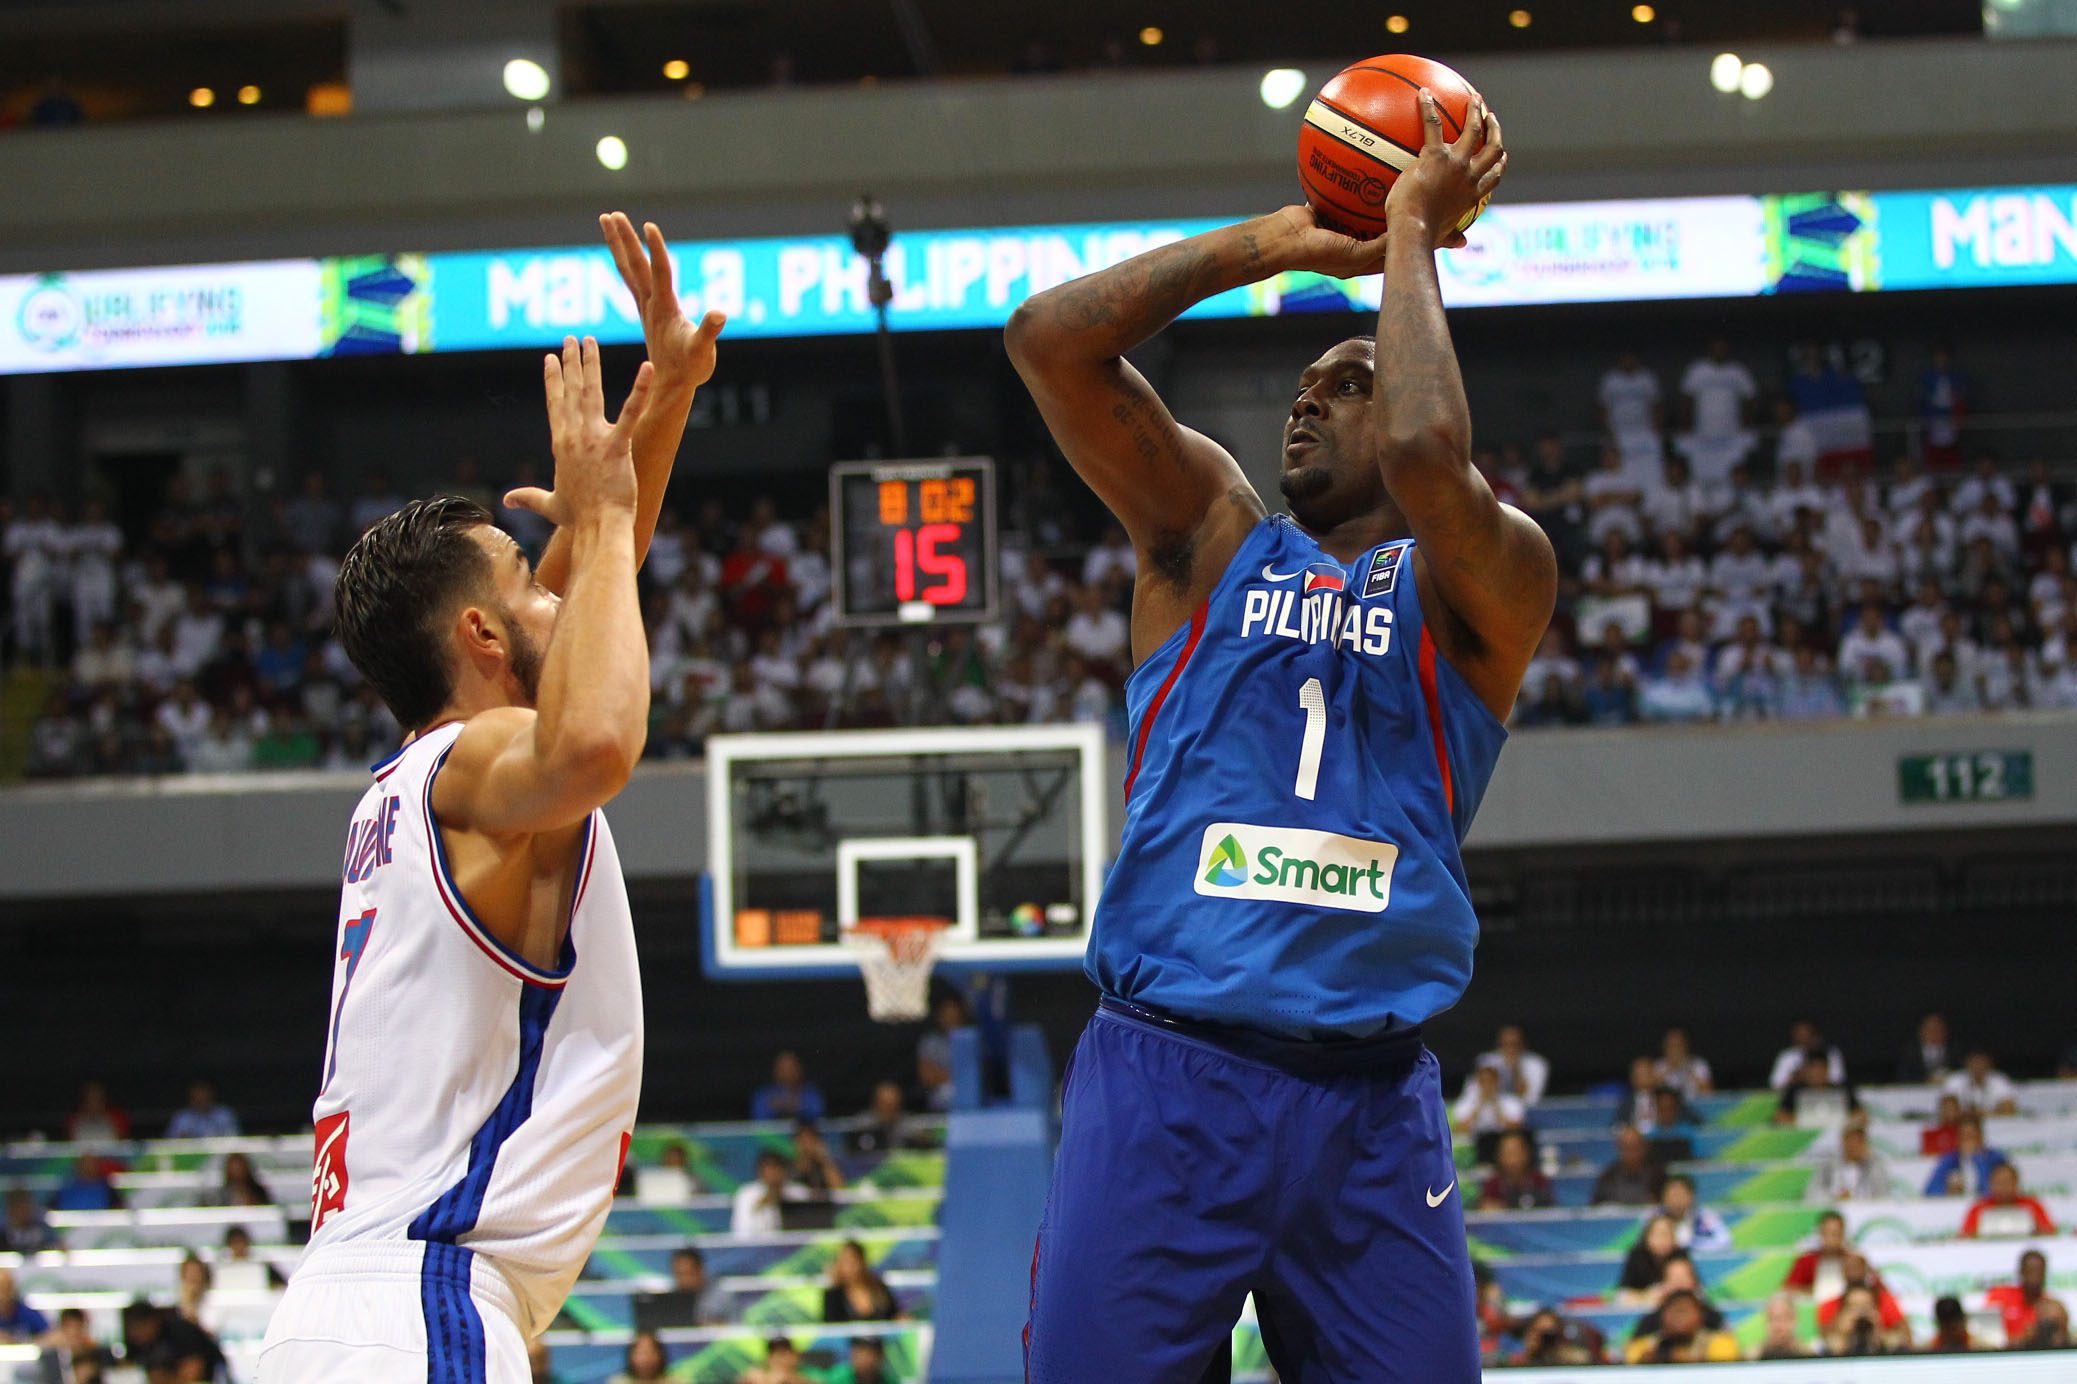 Andray Blatche sets up for a jump shot.  